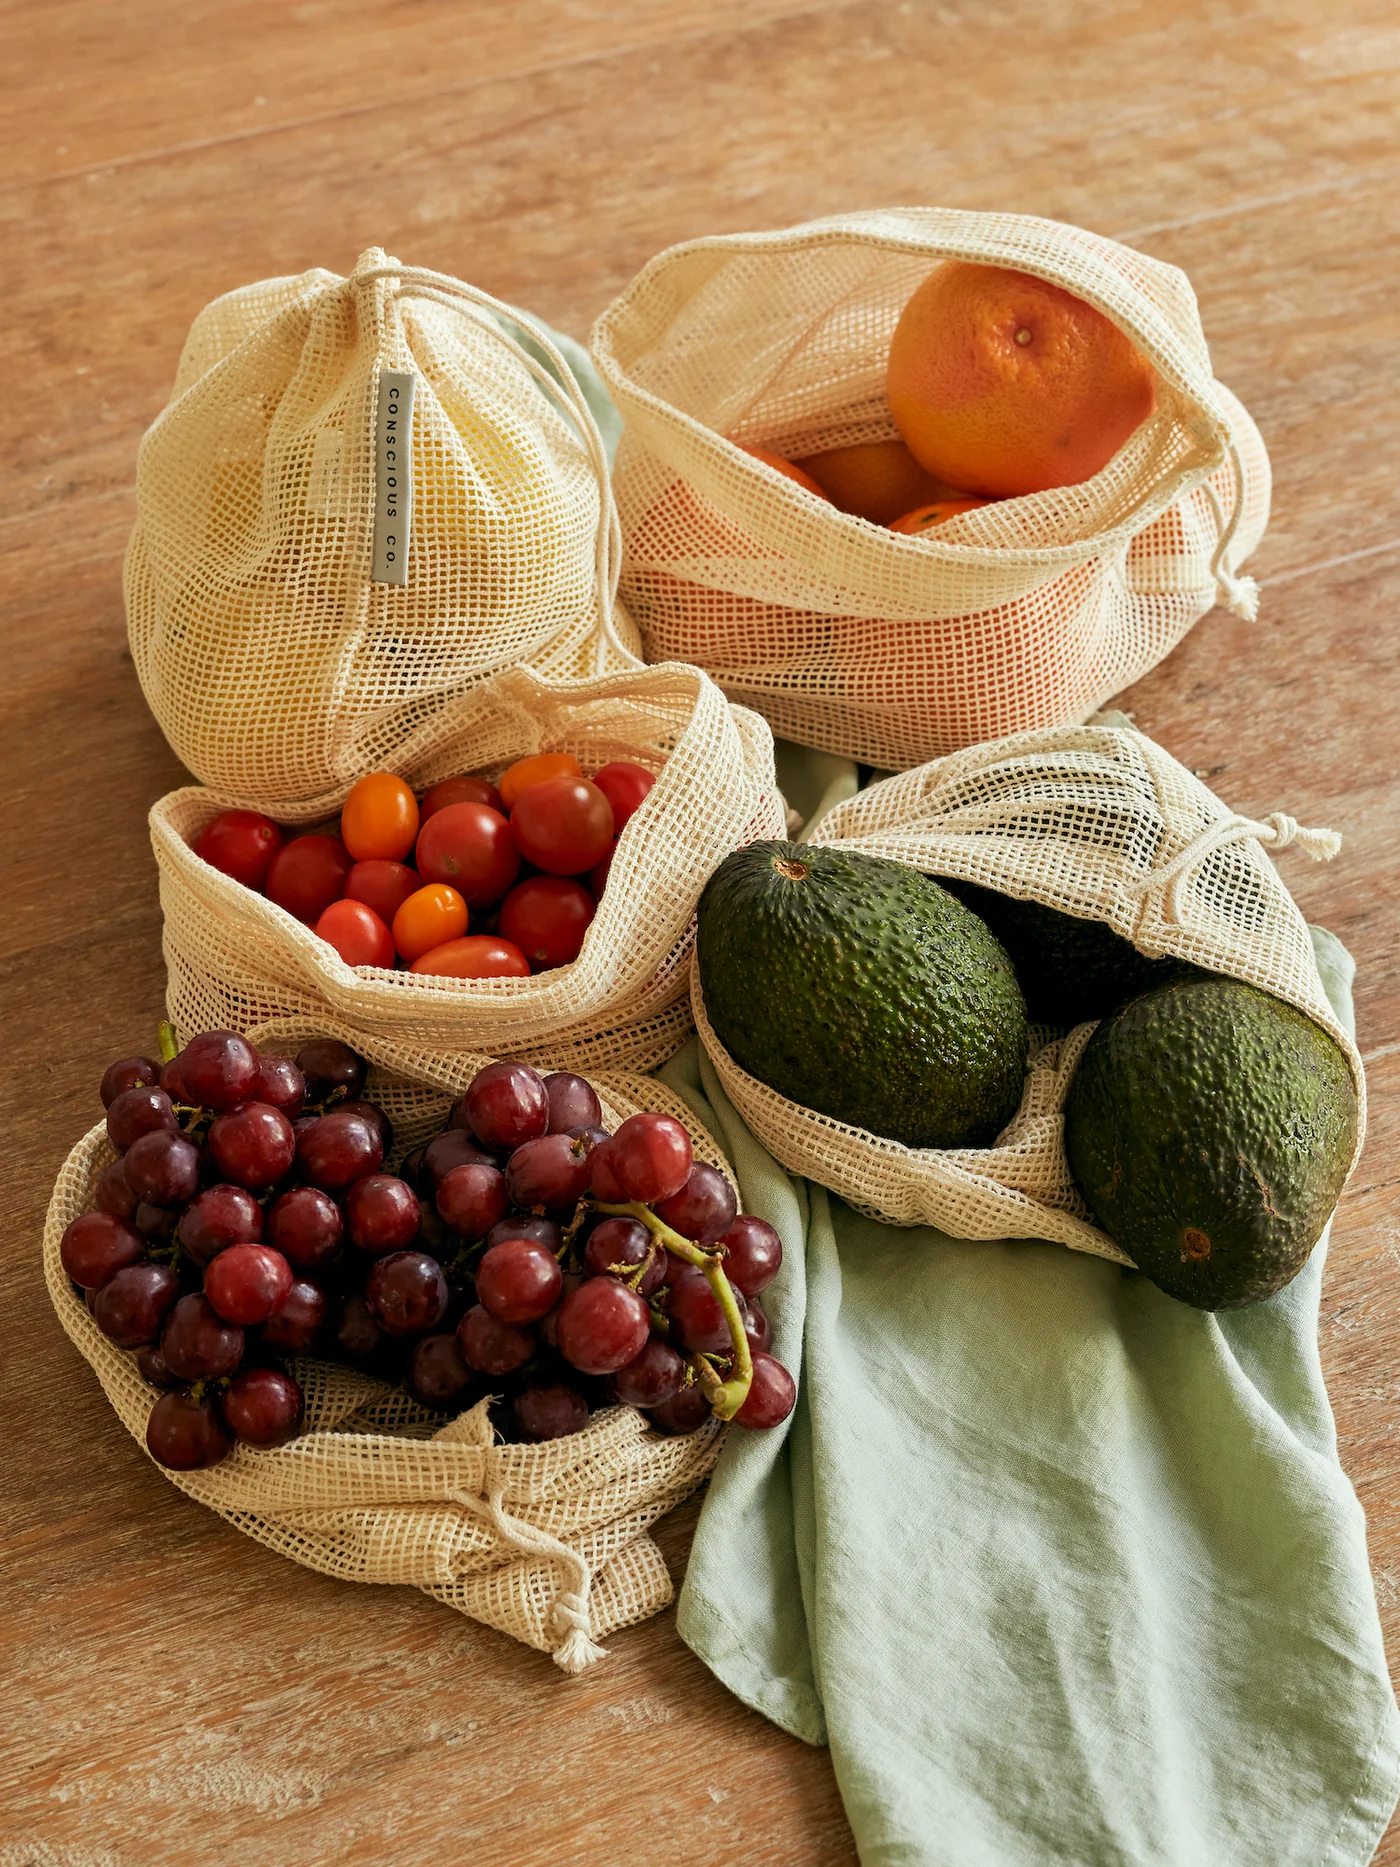 The Conscious Store - Organic Cotton Grocery Bags (set of 5)